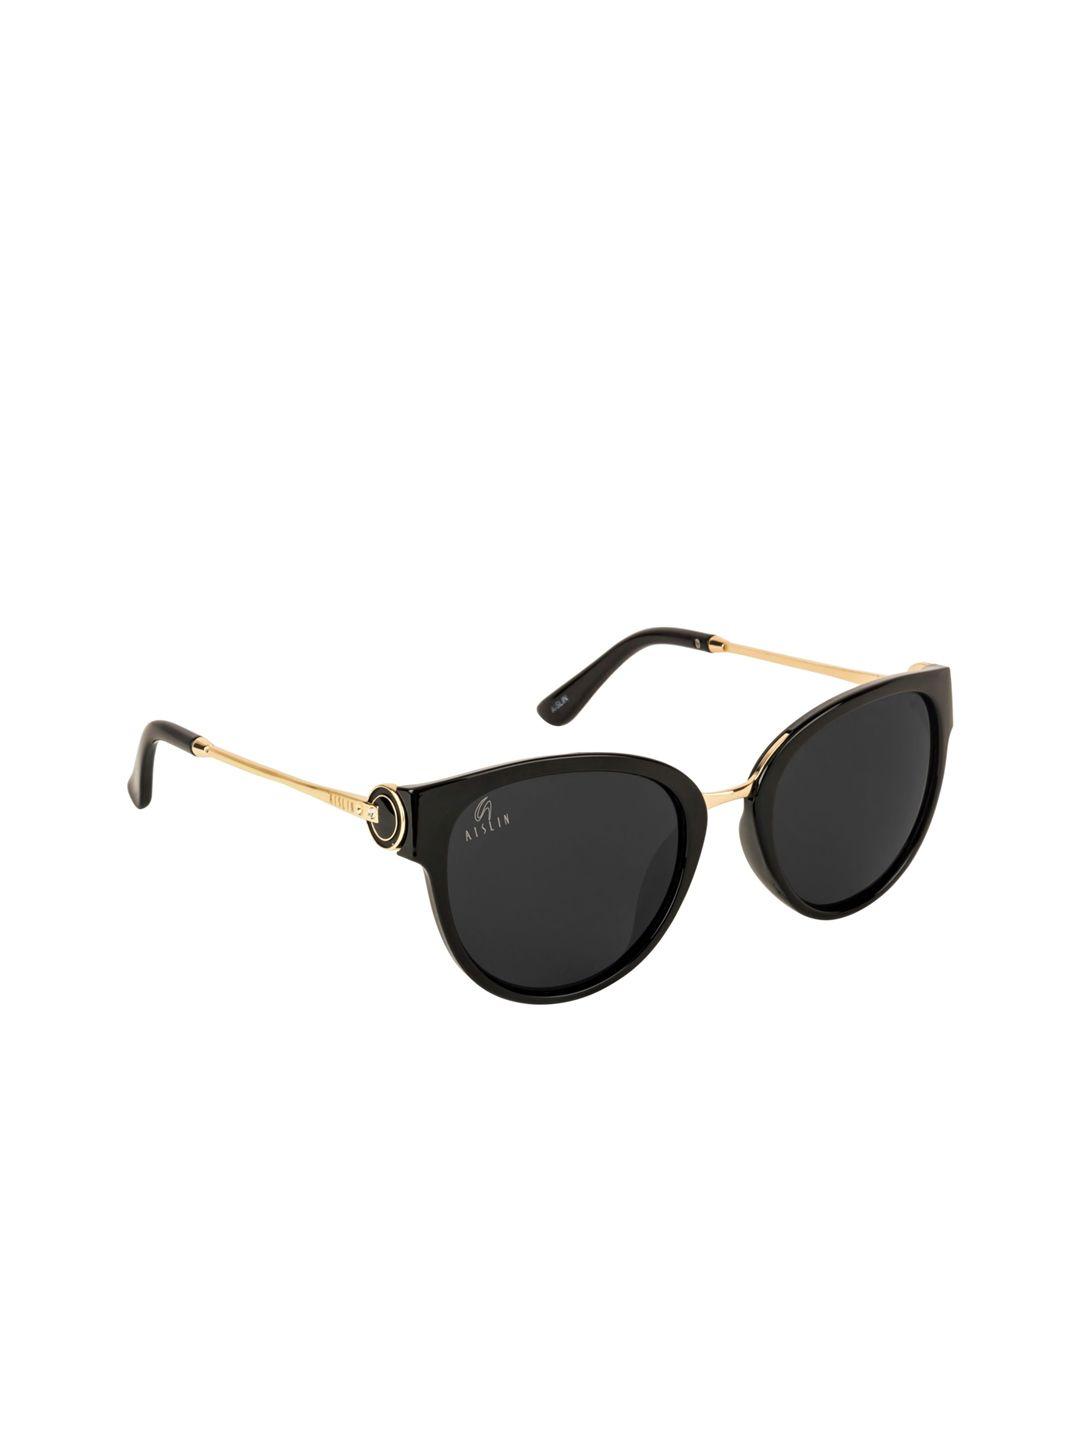 aislin women black lens & gold-toned oval sunglasses with uv protected lens